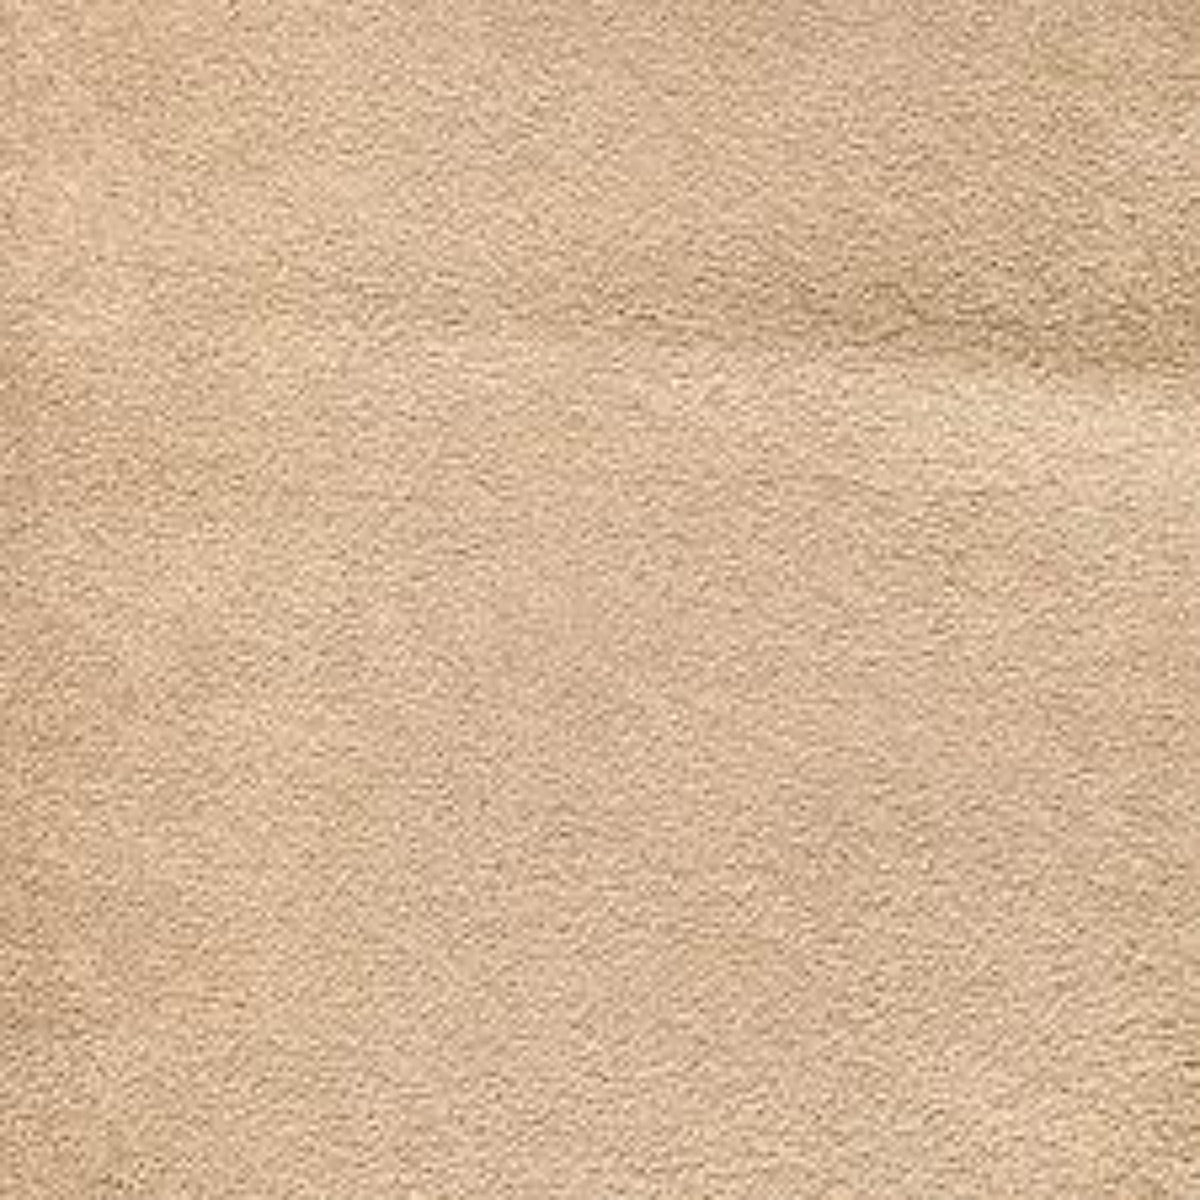 Beige Parchmont Microsuede Upholstery Drapery Fabric - Fashion Fabrics Los Angeles 